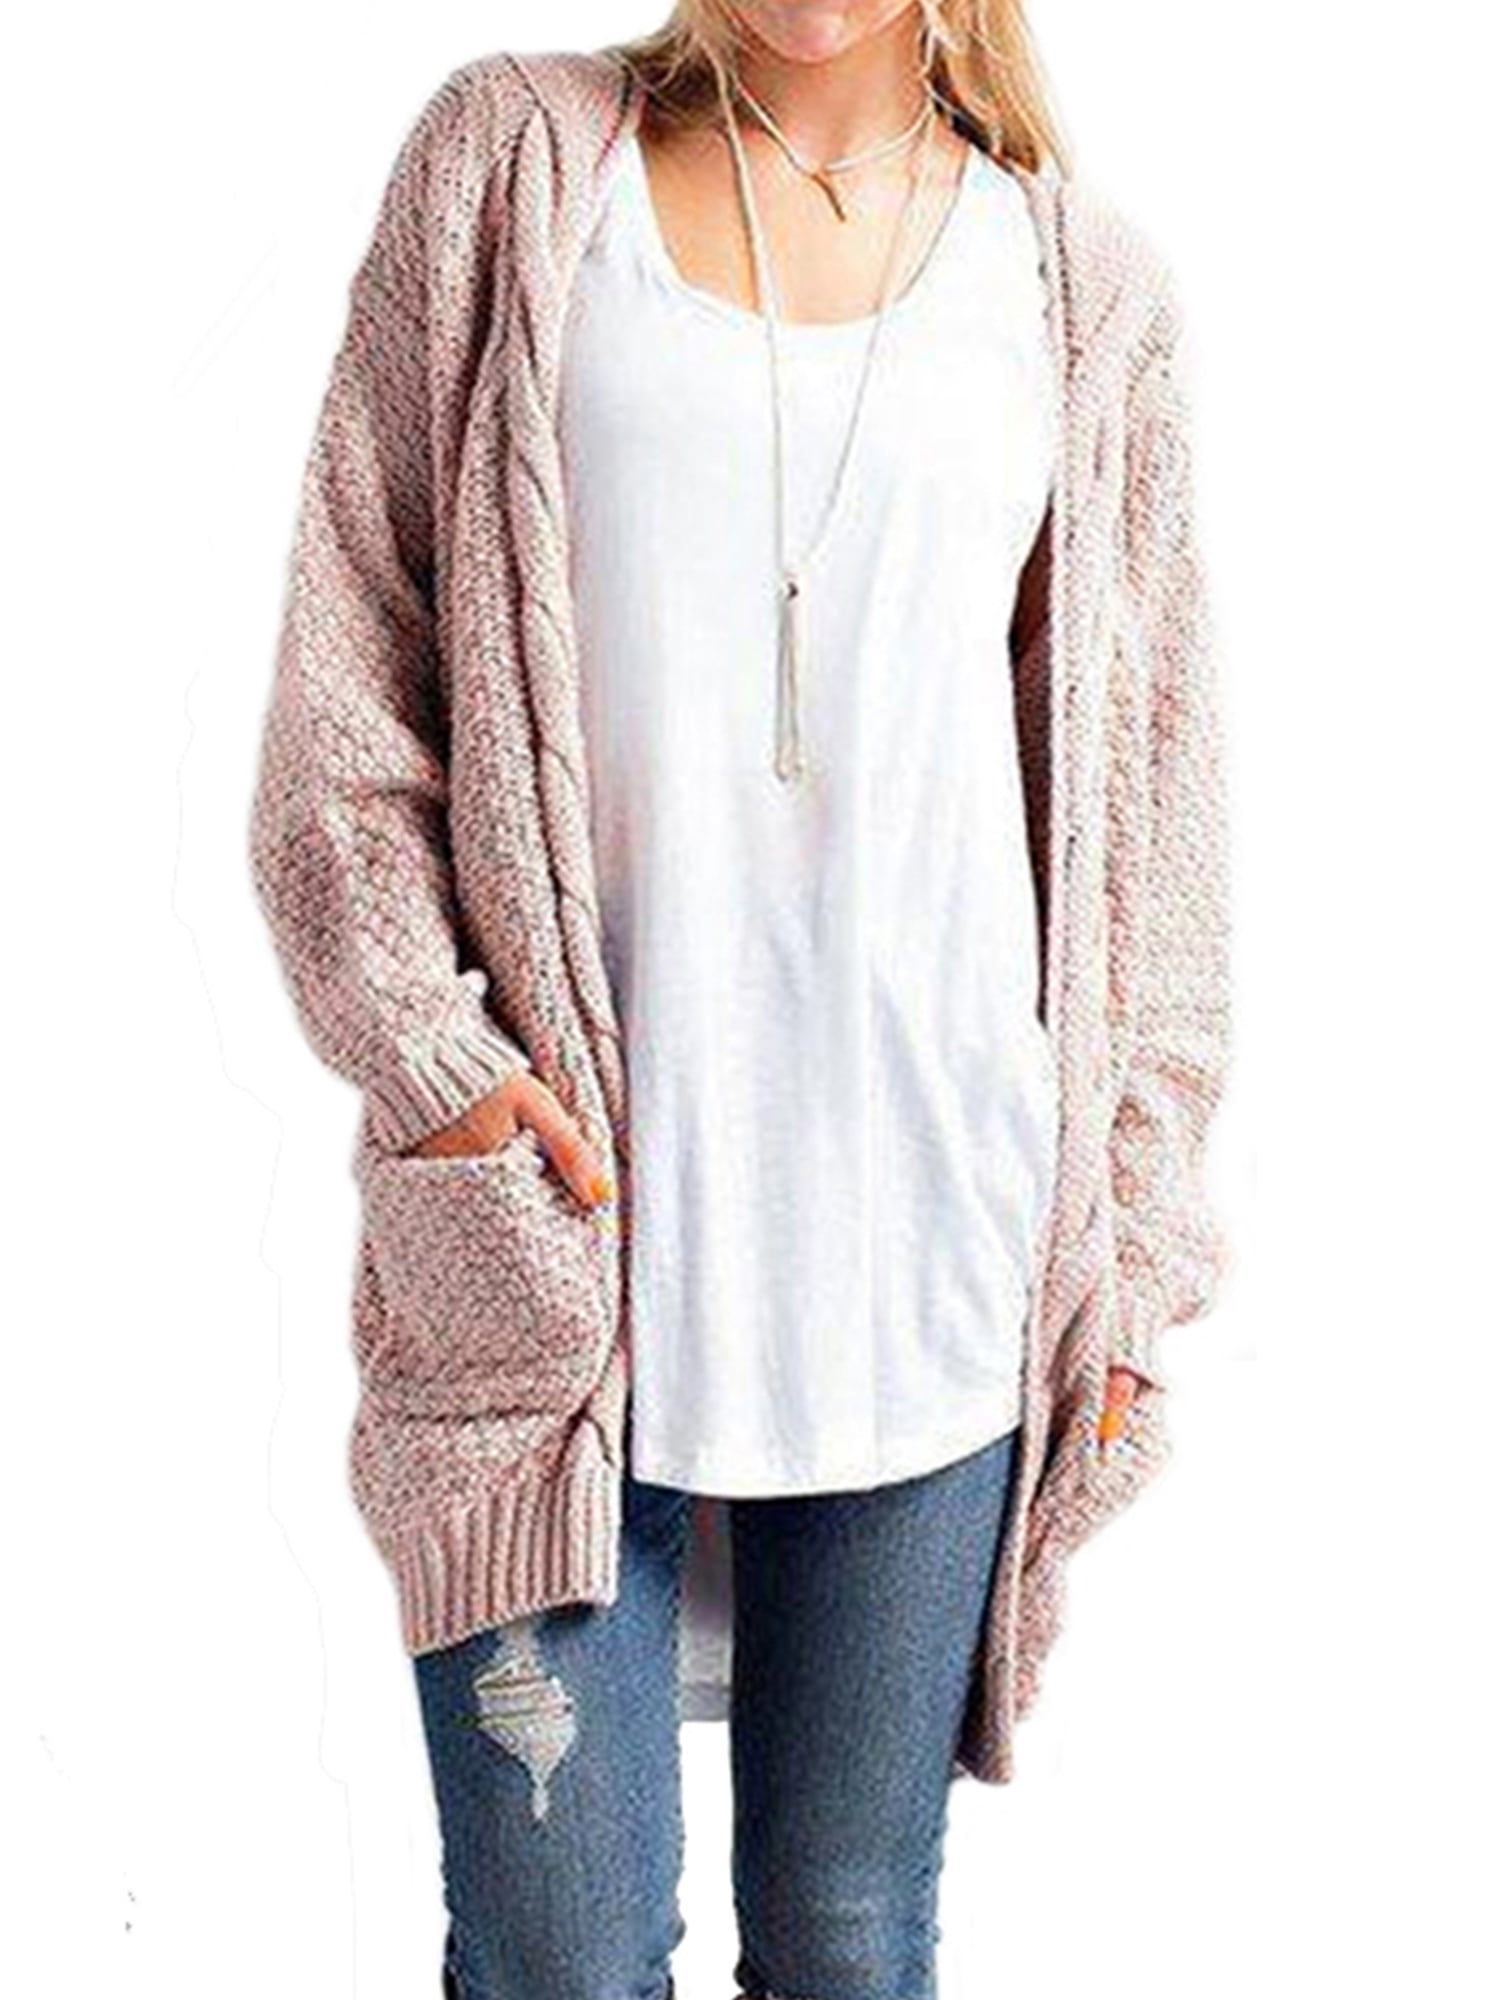 Women/'s Knitted Cardigan Belted Casual Long Sweater Ladies Jumper Coat Outwear